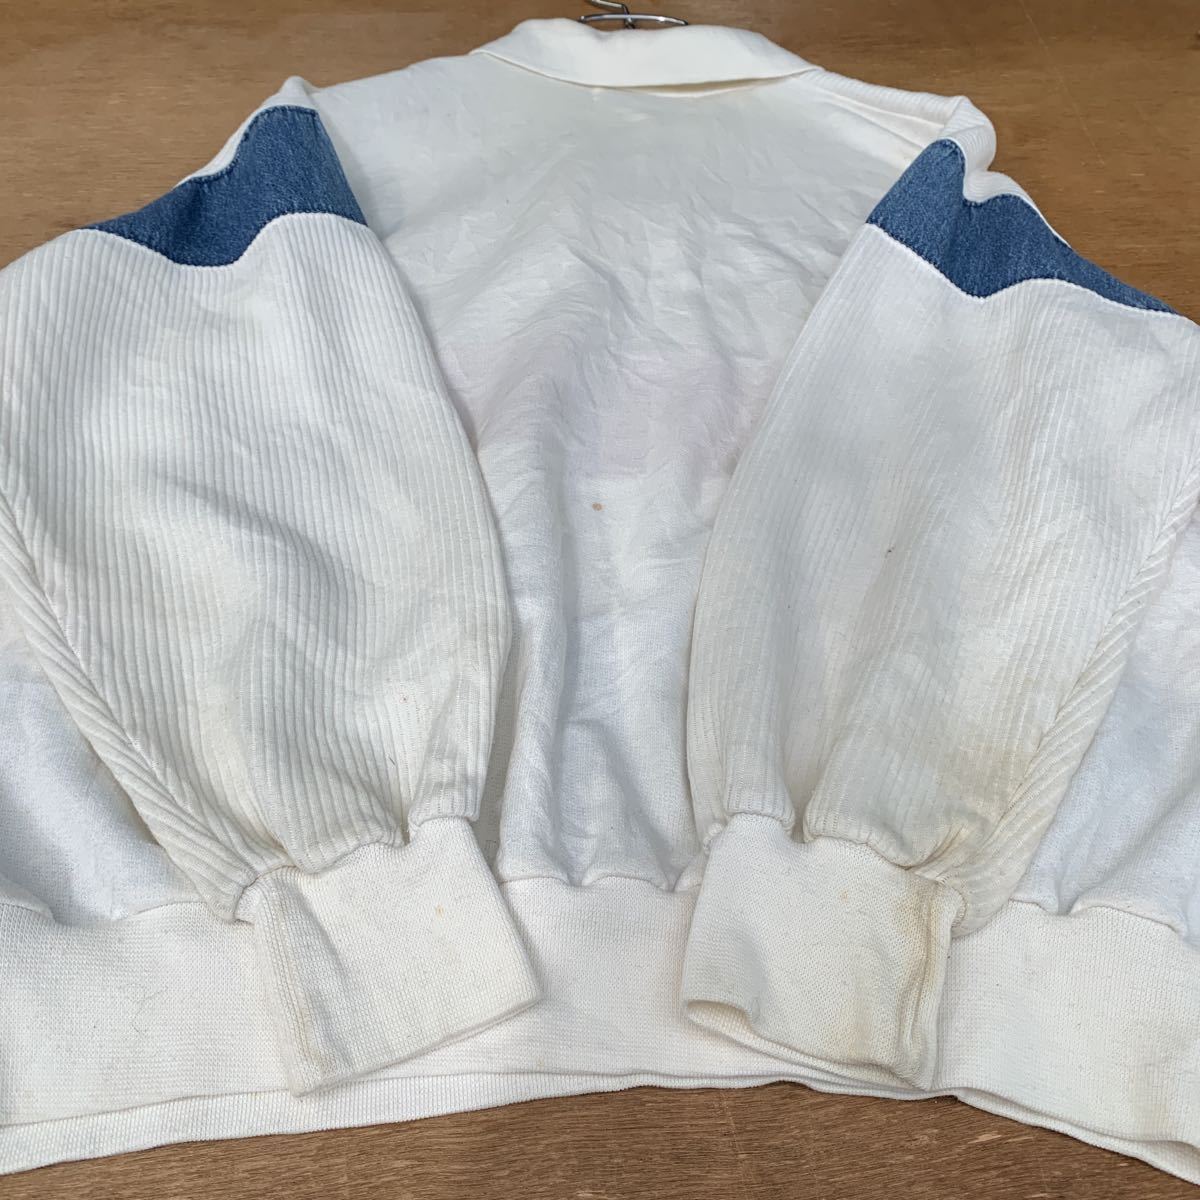 ALFRED DUNNER half button sweat pull over wi men's S ivory blue red retro old clothes . America buying up a502-5512